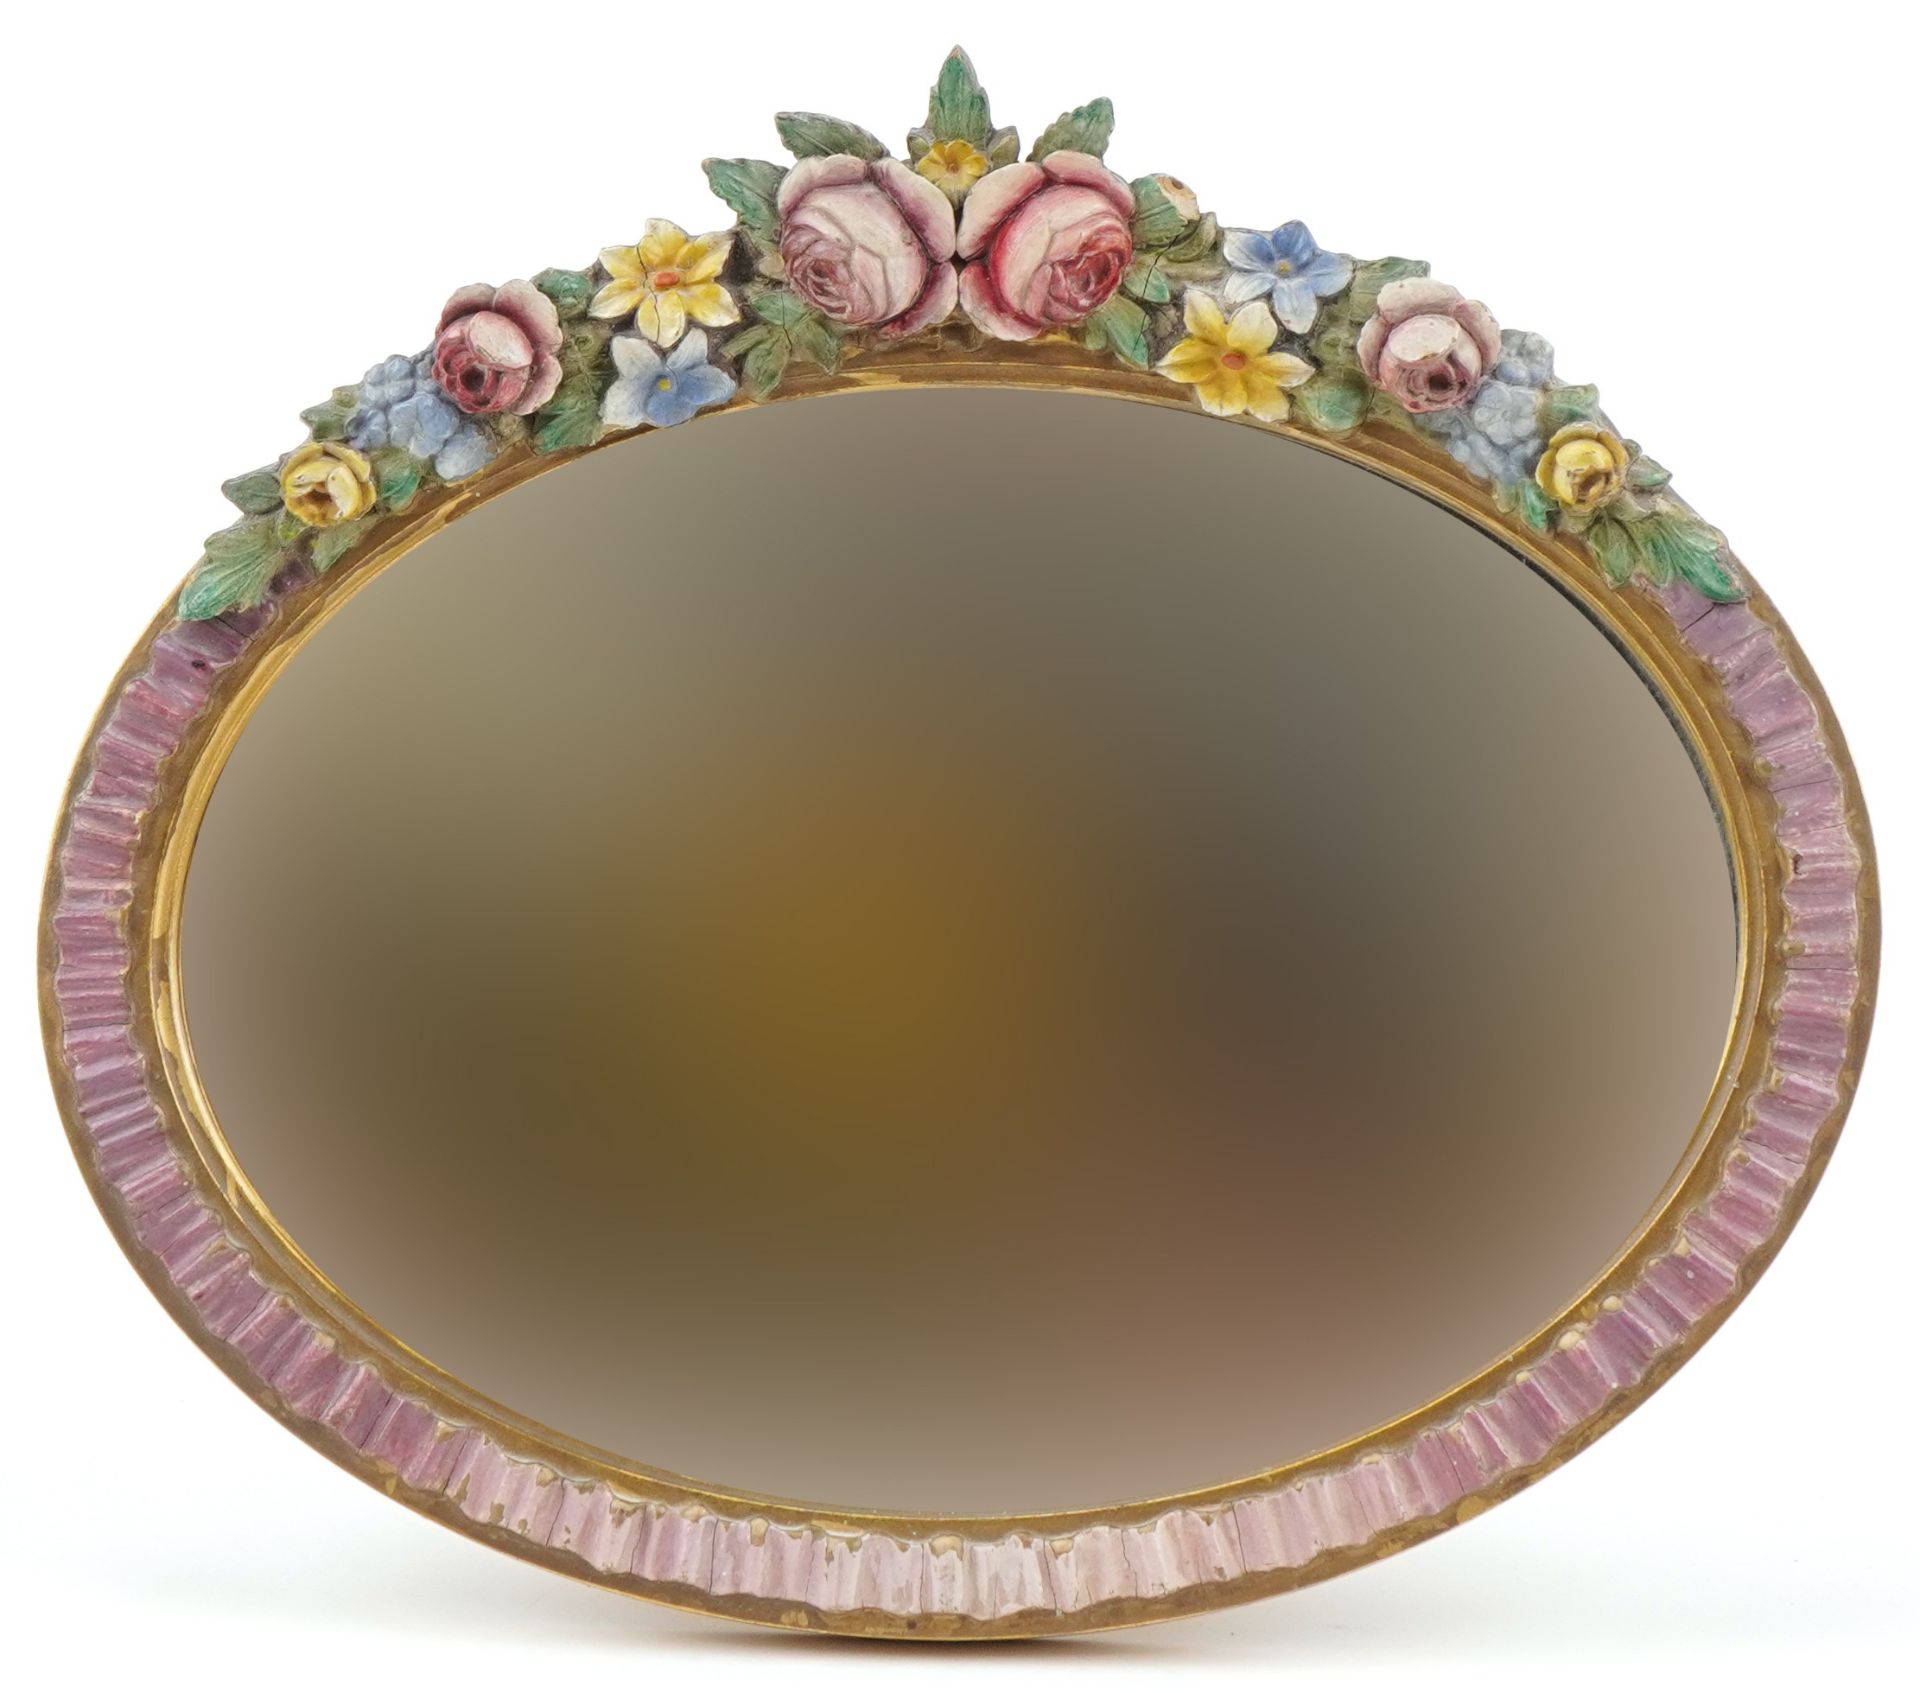 Vintage oval Barbola easel mirror with bevelled glass, 40cm wide